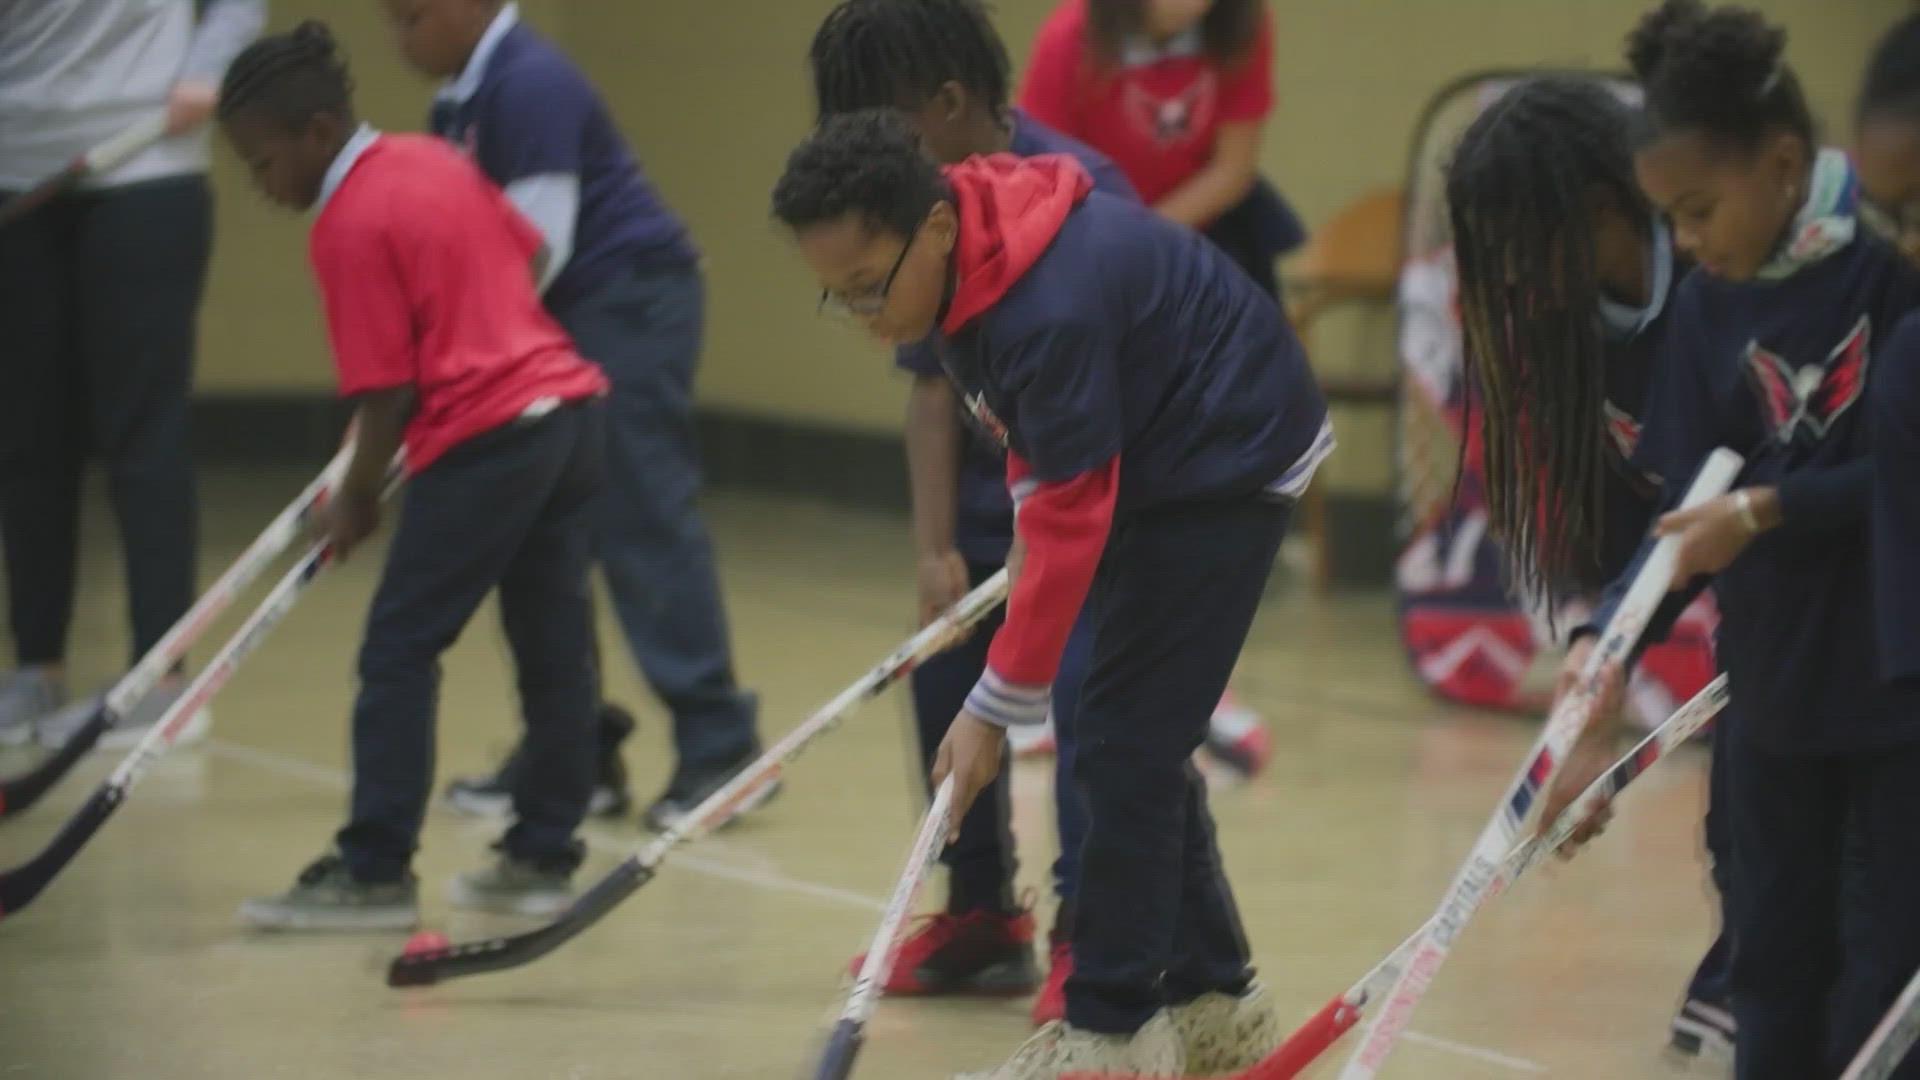 It's part of the team's 3.5M investment in developing youth hockey across the DMV.